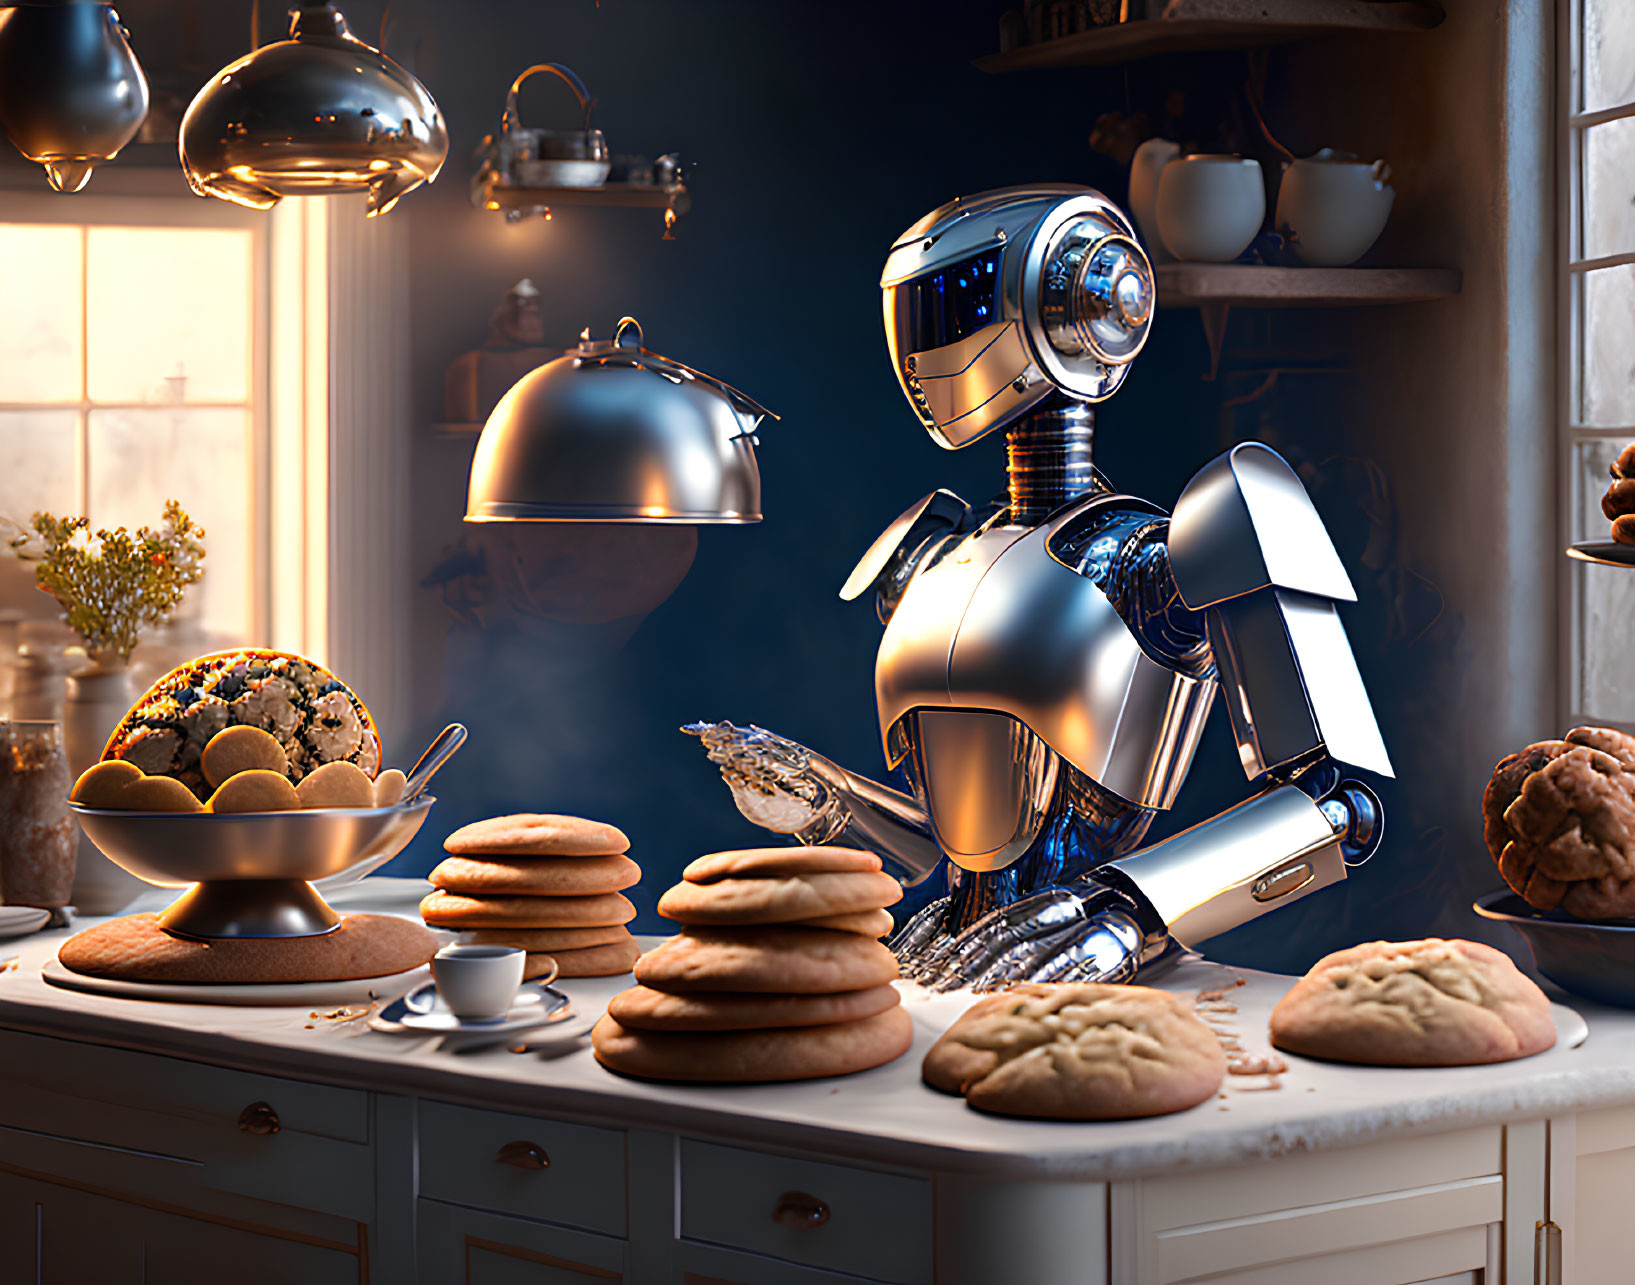 Futuristic robot baking in cozy kitchen with cookies and pots under warm lighting